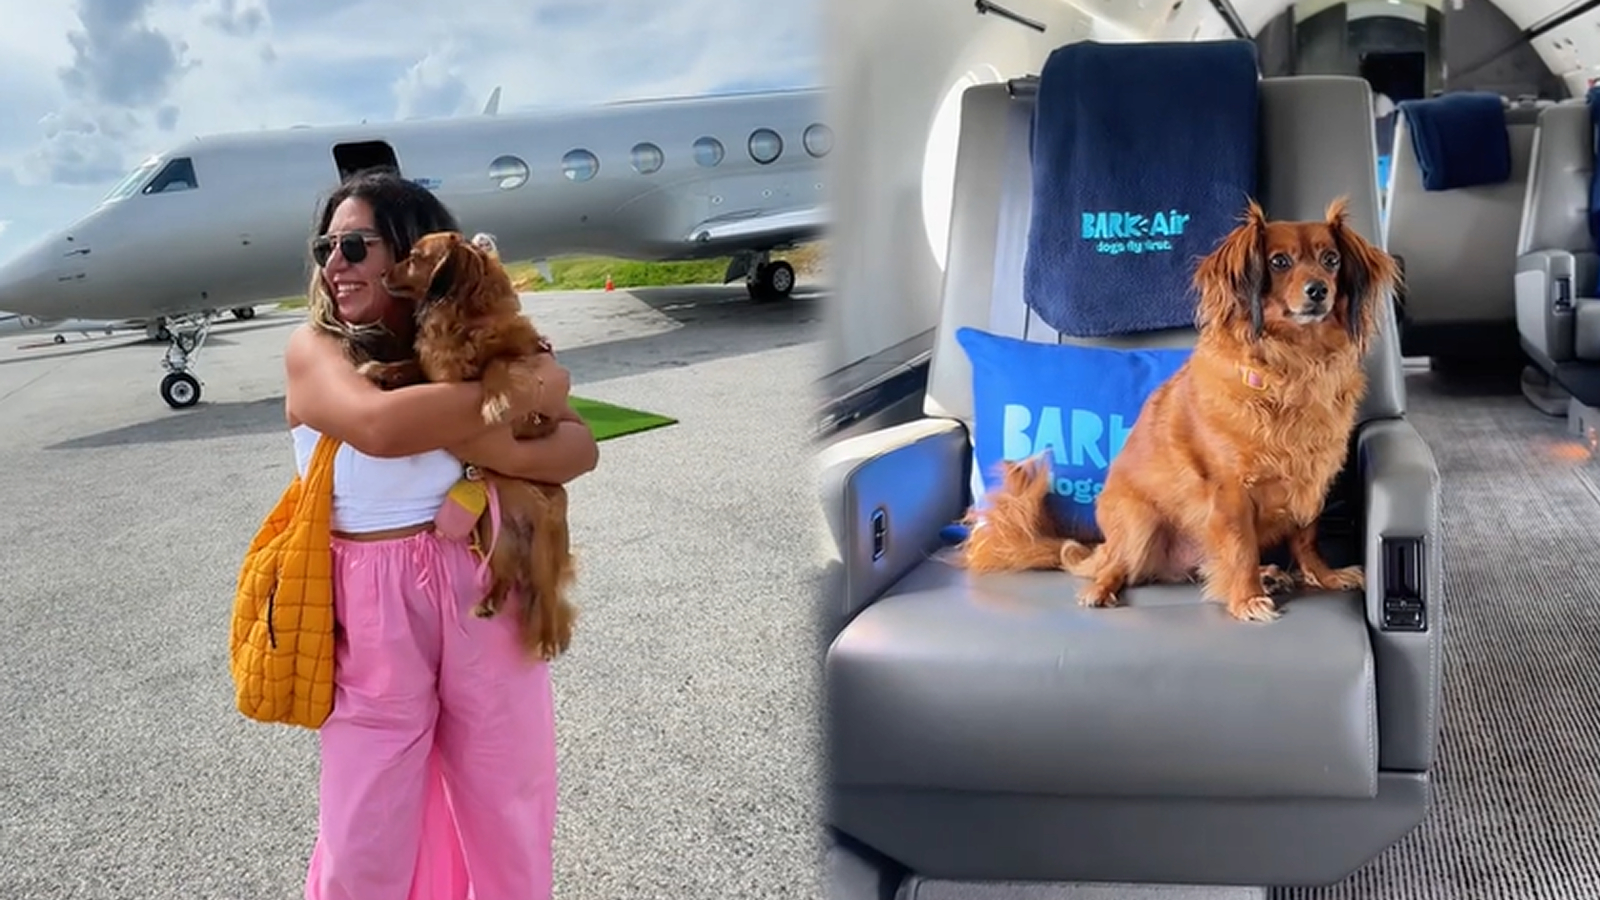 A dog-friendly airline is going viral as influencer travels with her pet